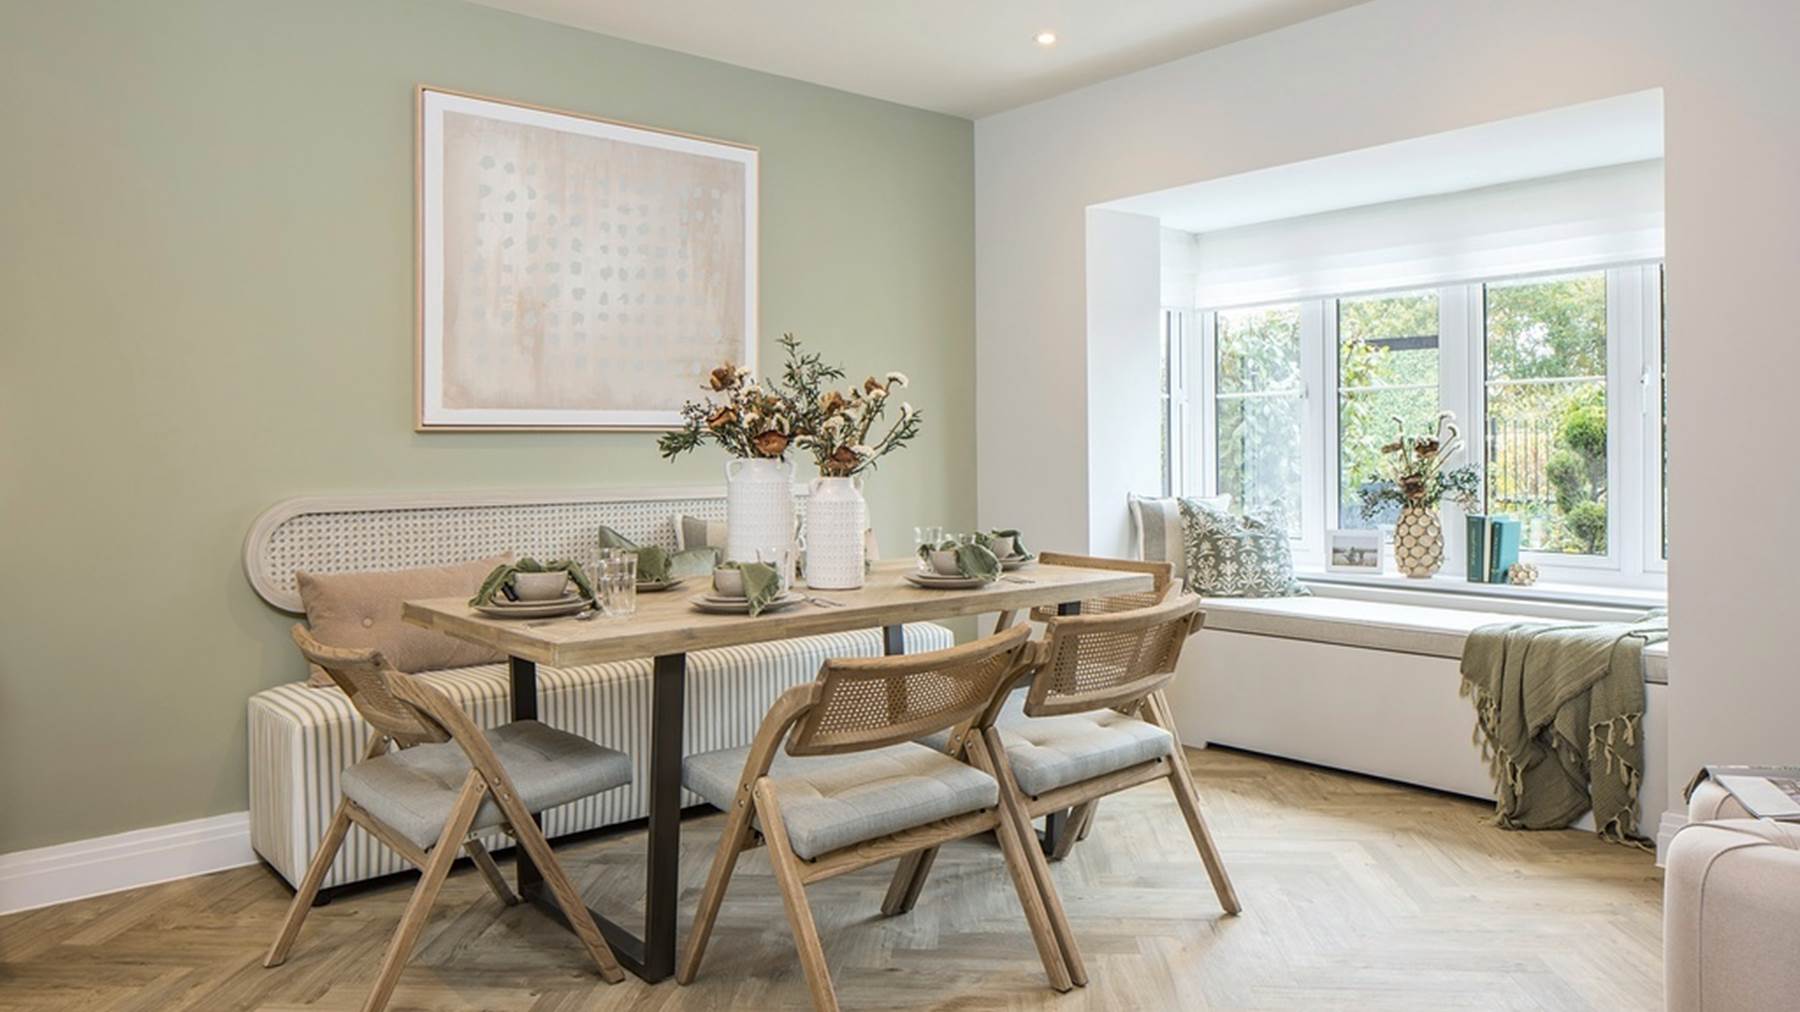 Photography of Cala's 4 bedroom Walnut showhome at Nobel Park. Houses for sale in Didcot, Oxfordshire. 